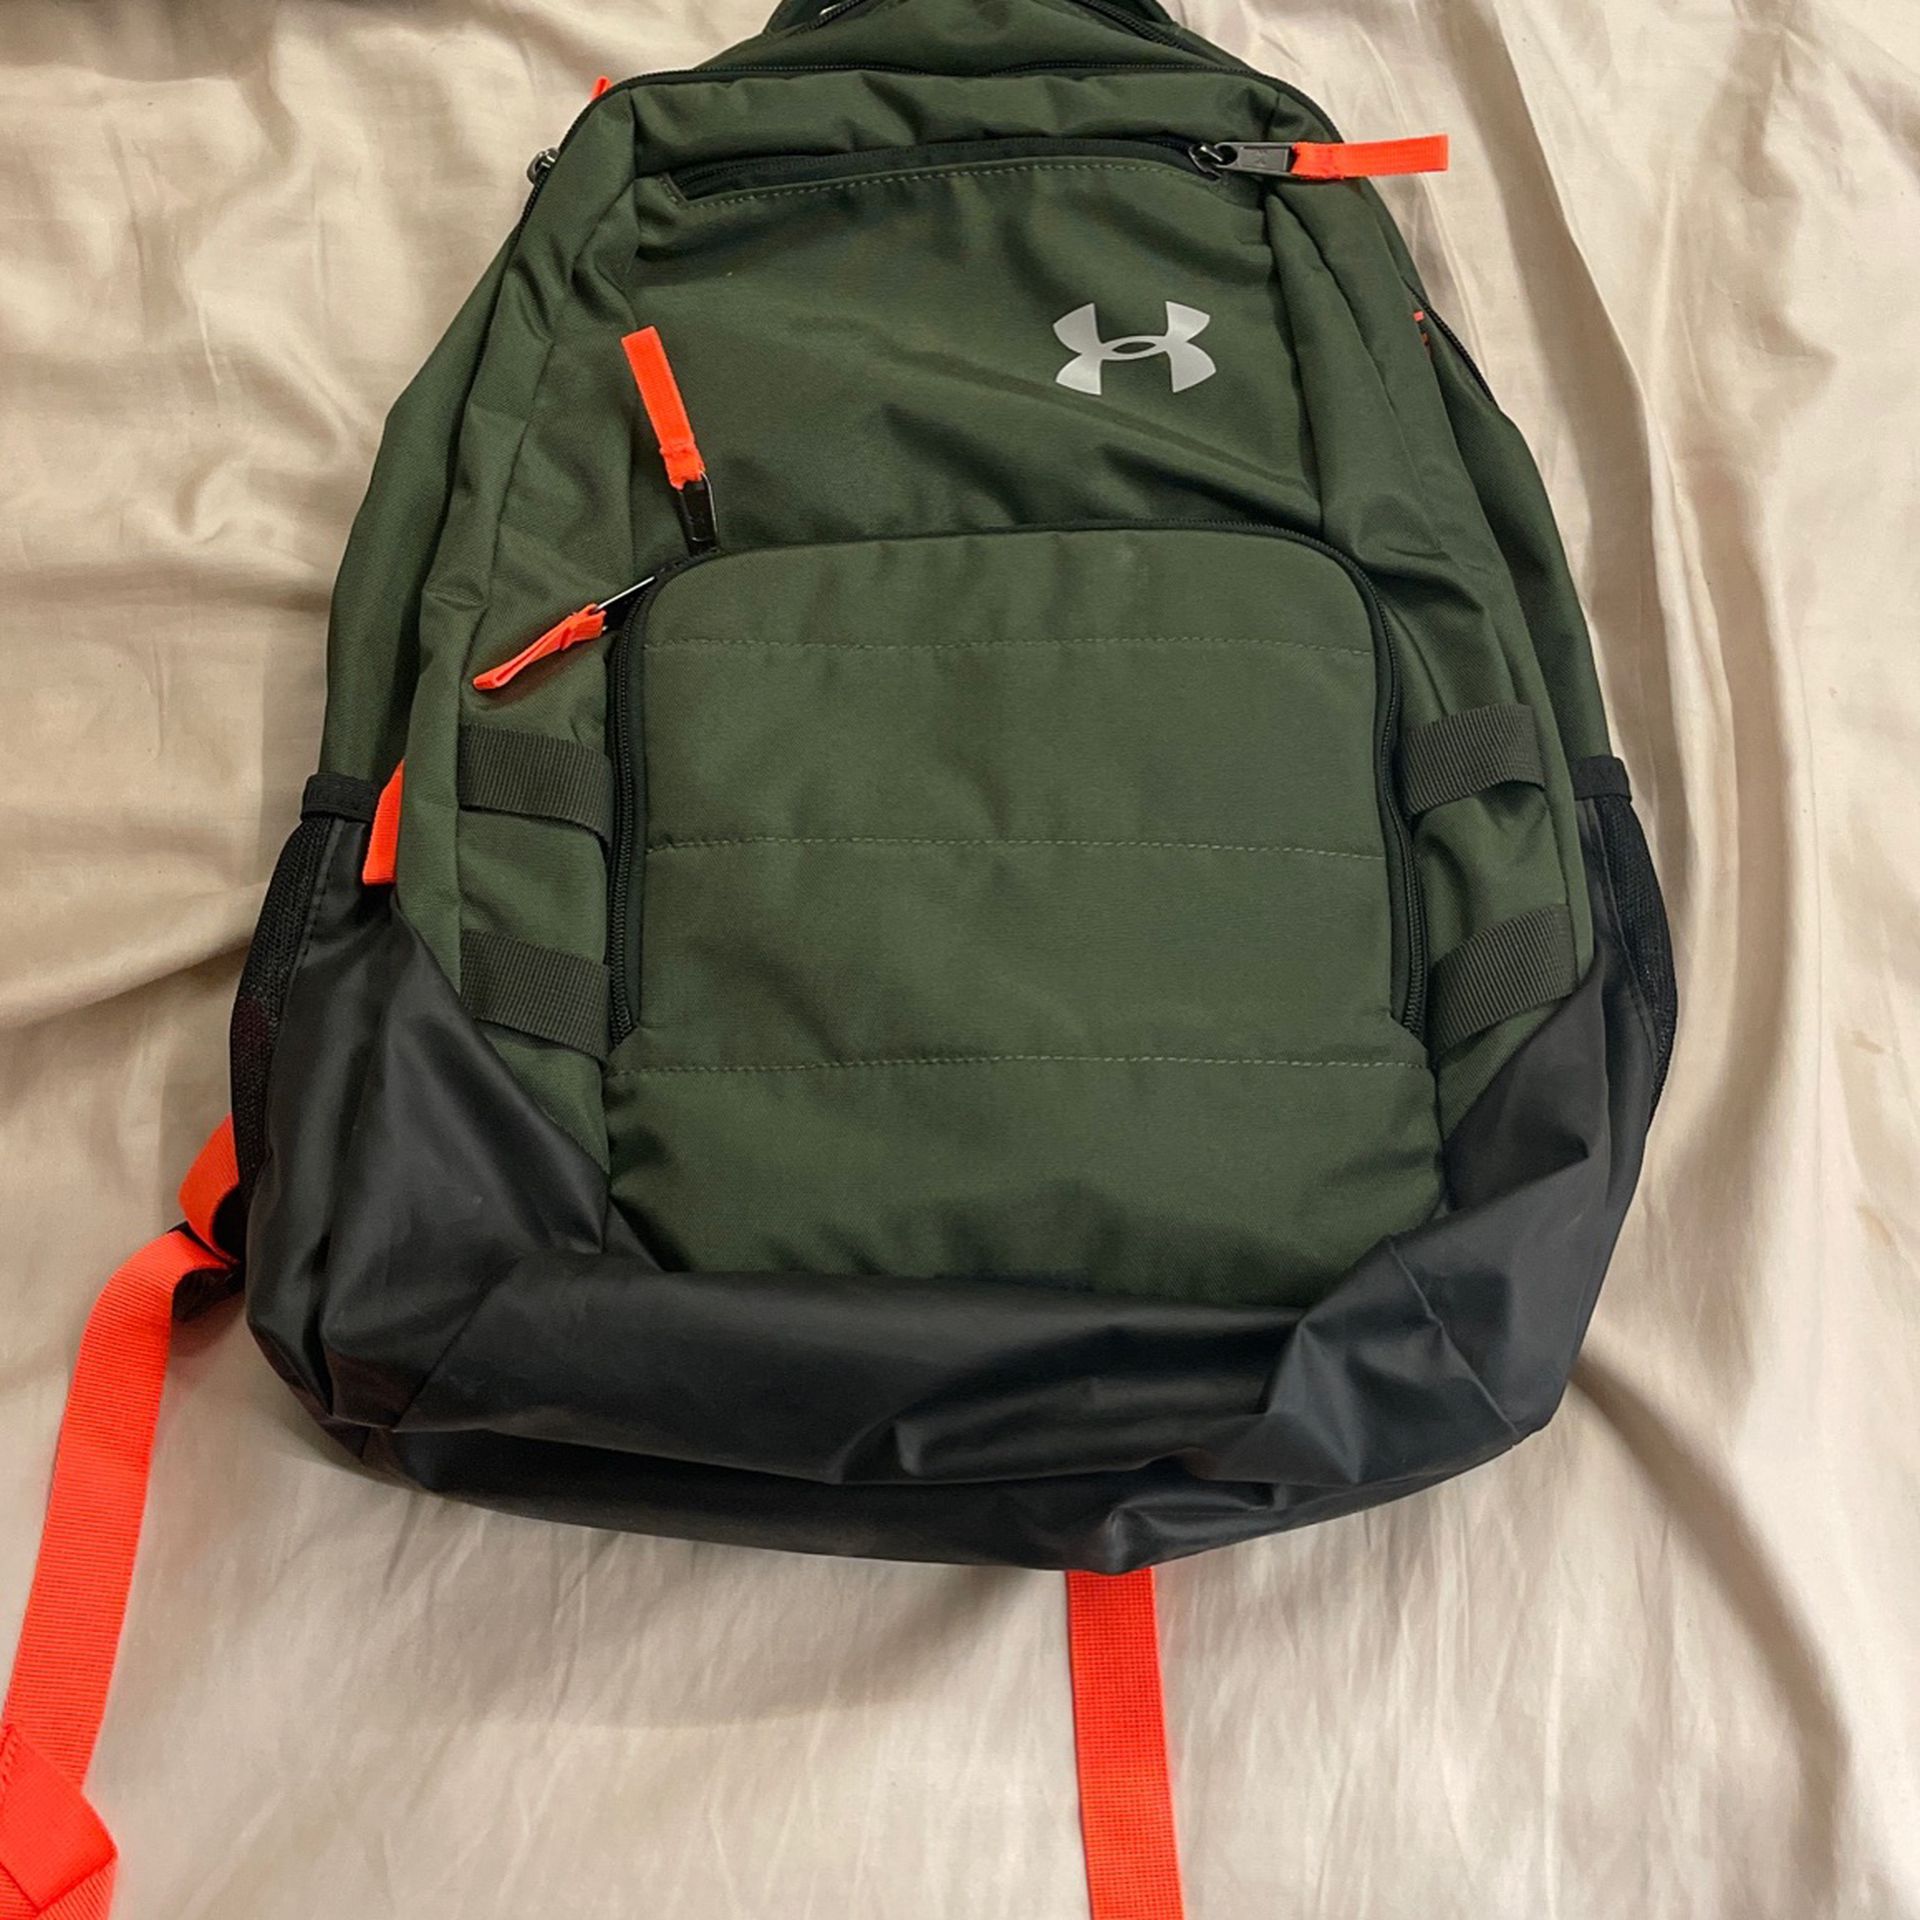 Under Armour Backpack Never Used!!!